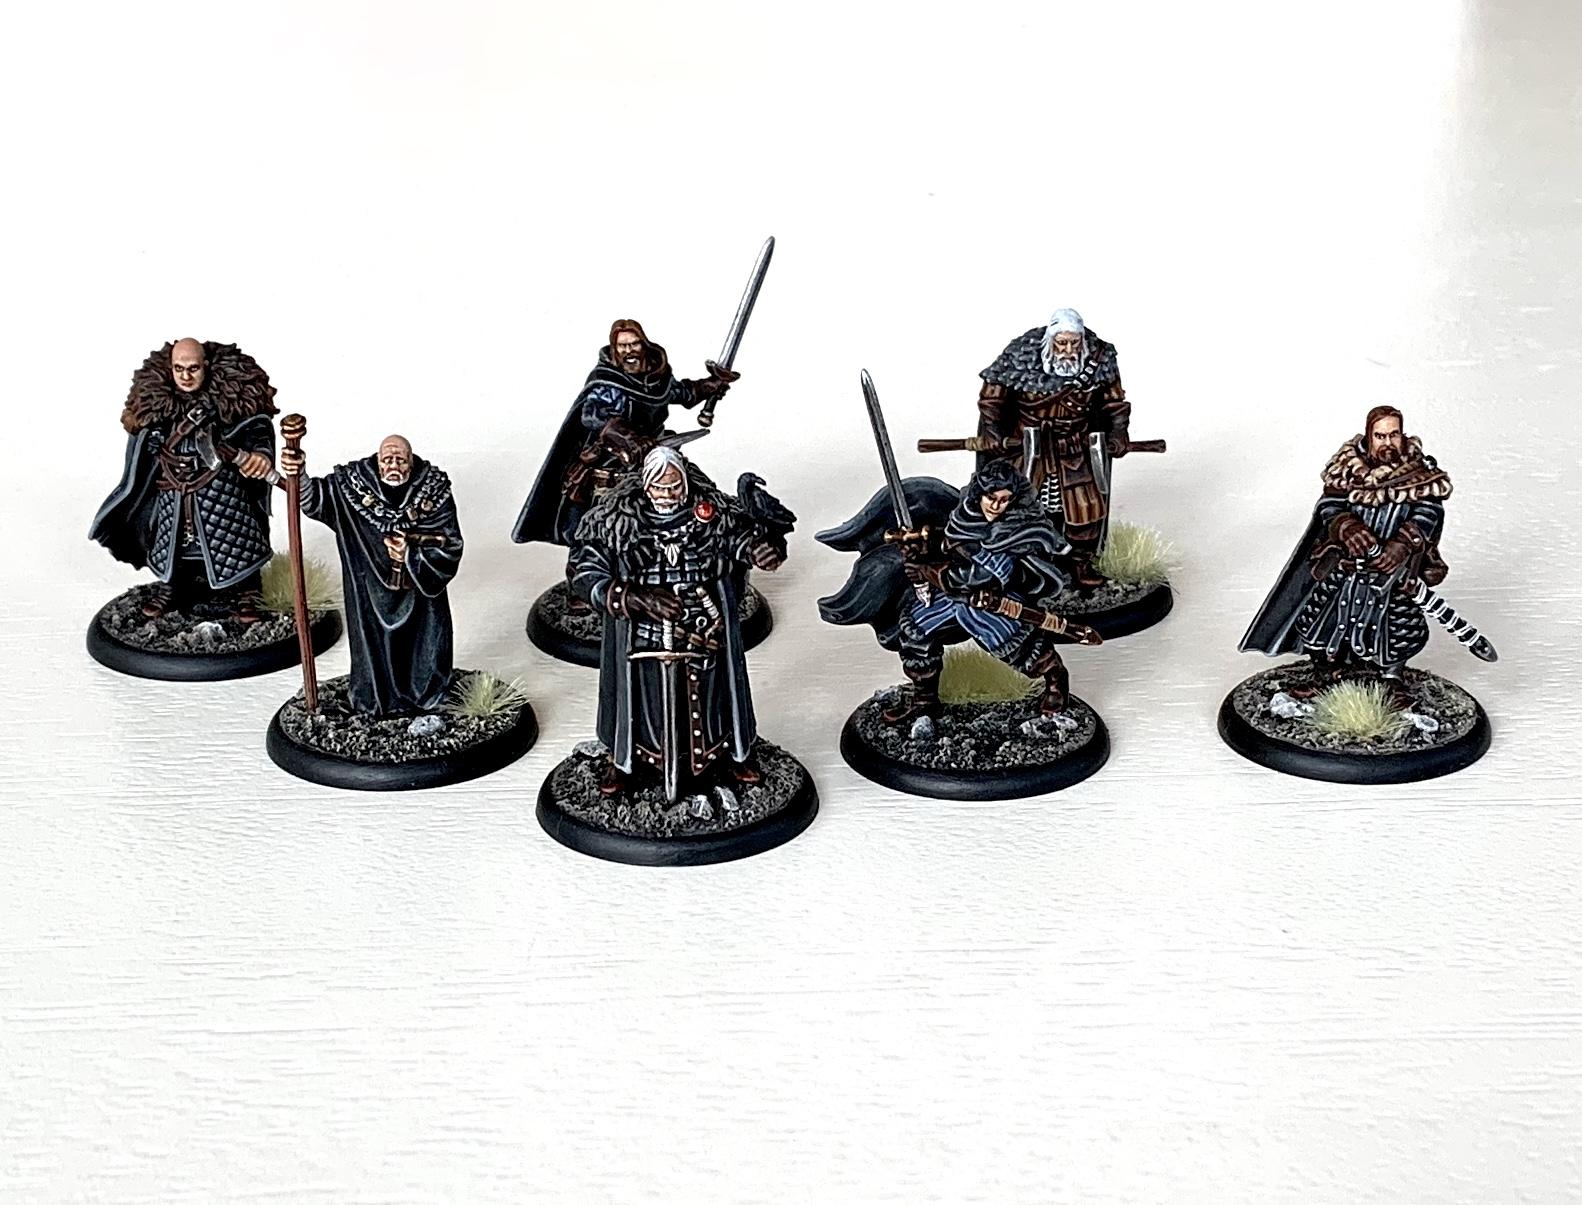 28mm, A Song Of Ice And Fire, Game Of Thrones, Infantry, Medieval, Night's Watch, Warhammer Fantasy